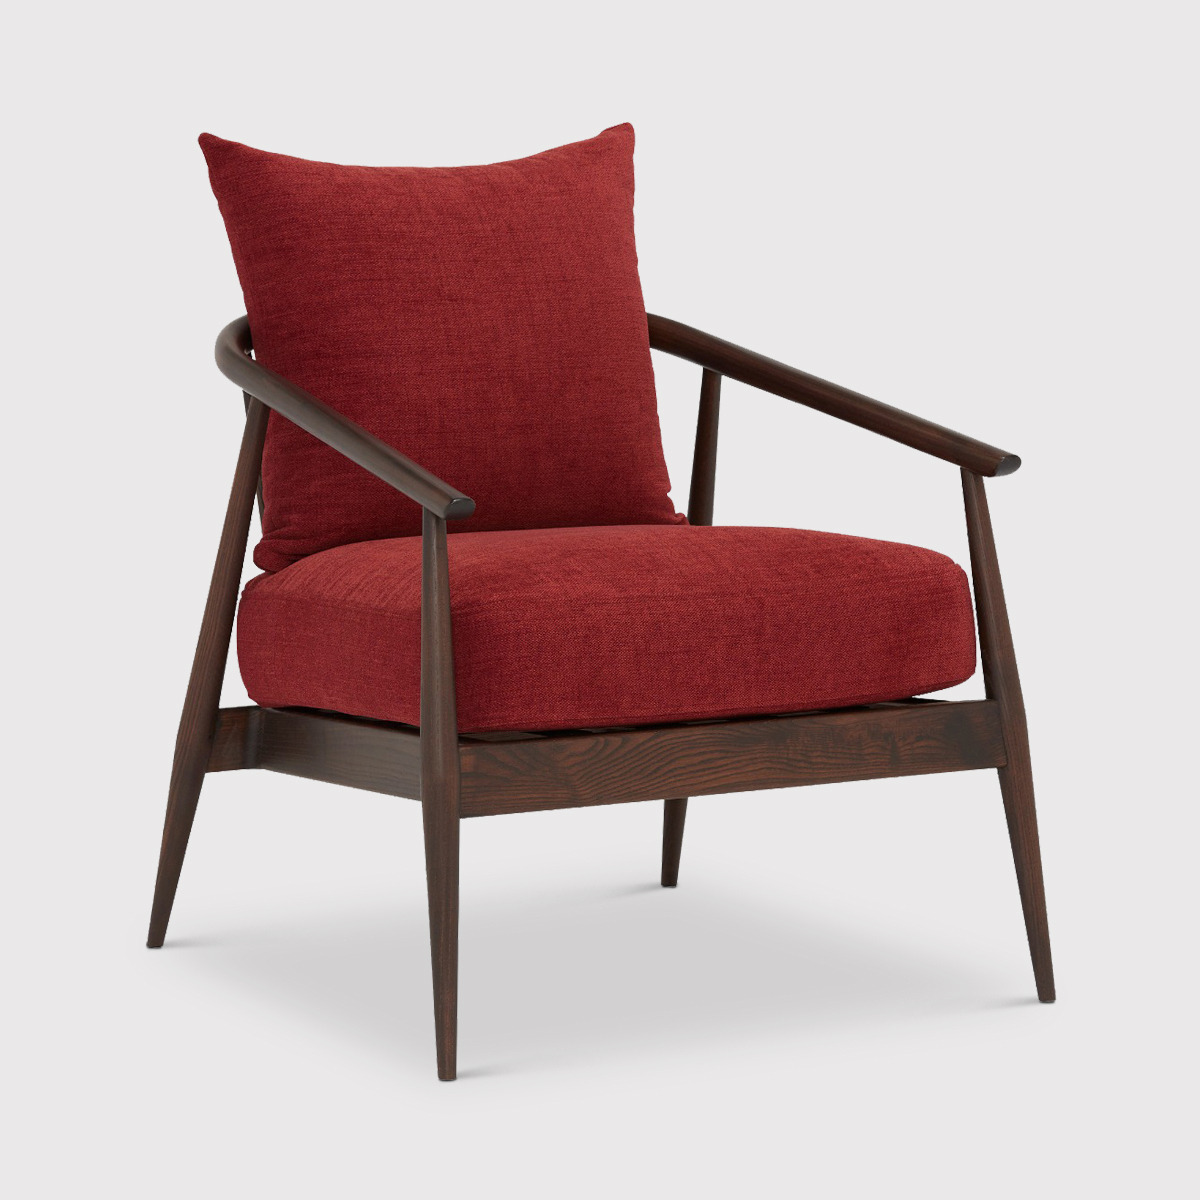 Ercol Aldbury Armchair, Red Fabric - Barker & Stonehouse - image 1